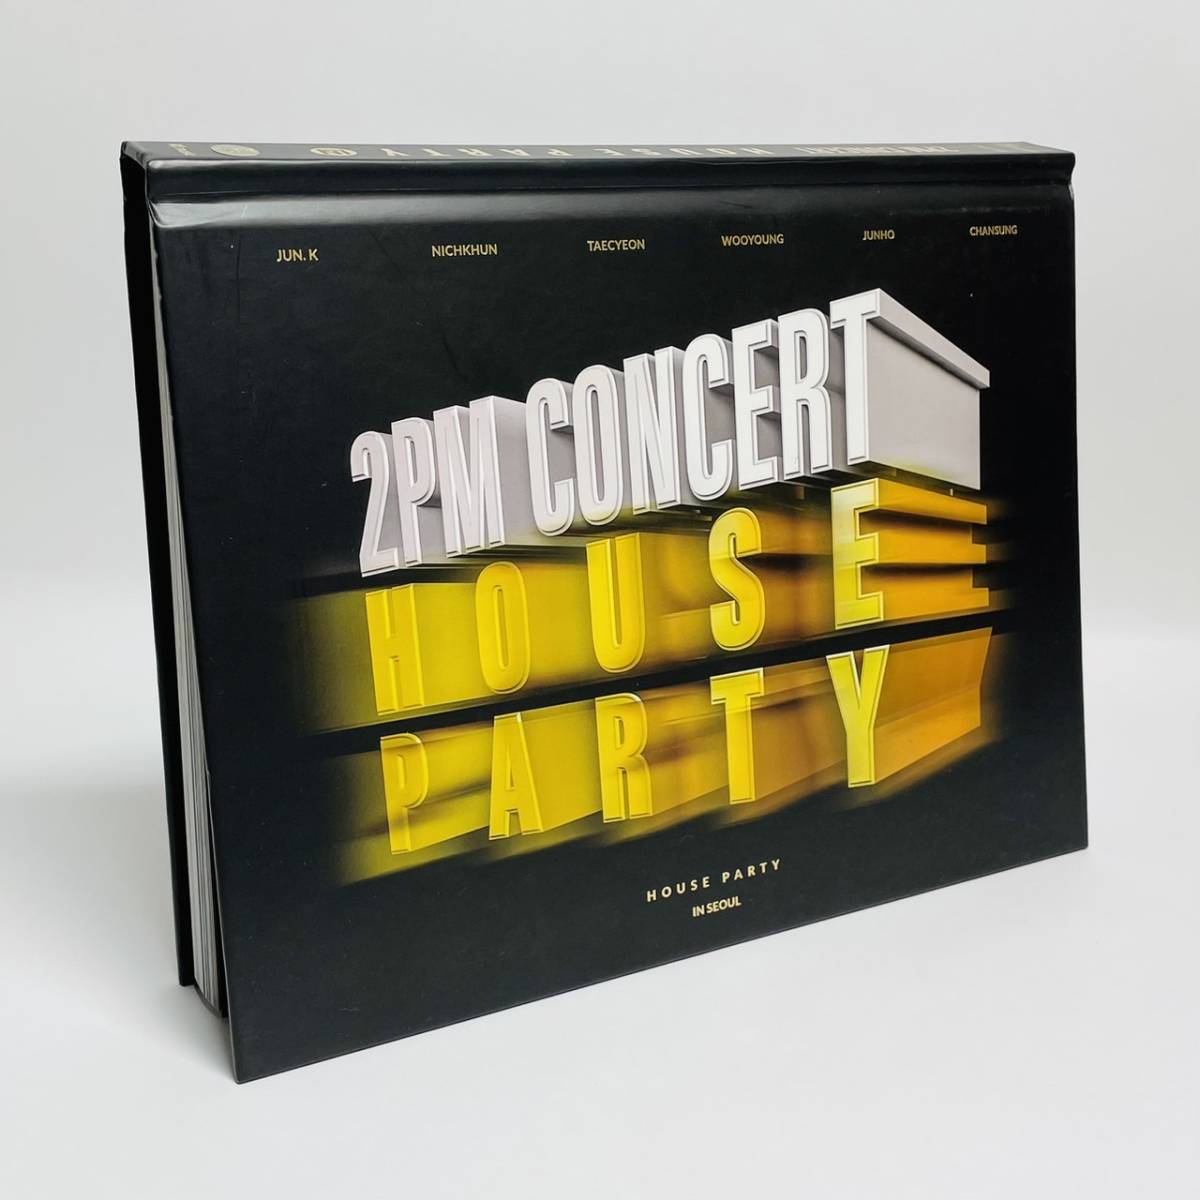 2PM HOUSE PARTY IN SEOUL DVD｜PayPayフリマ